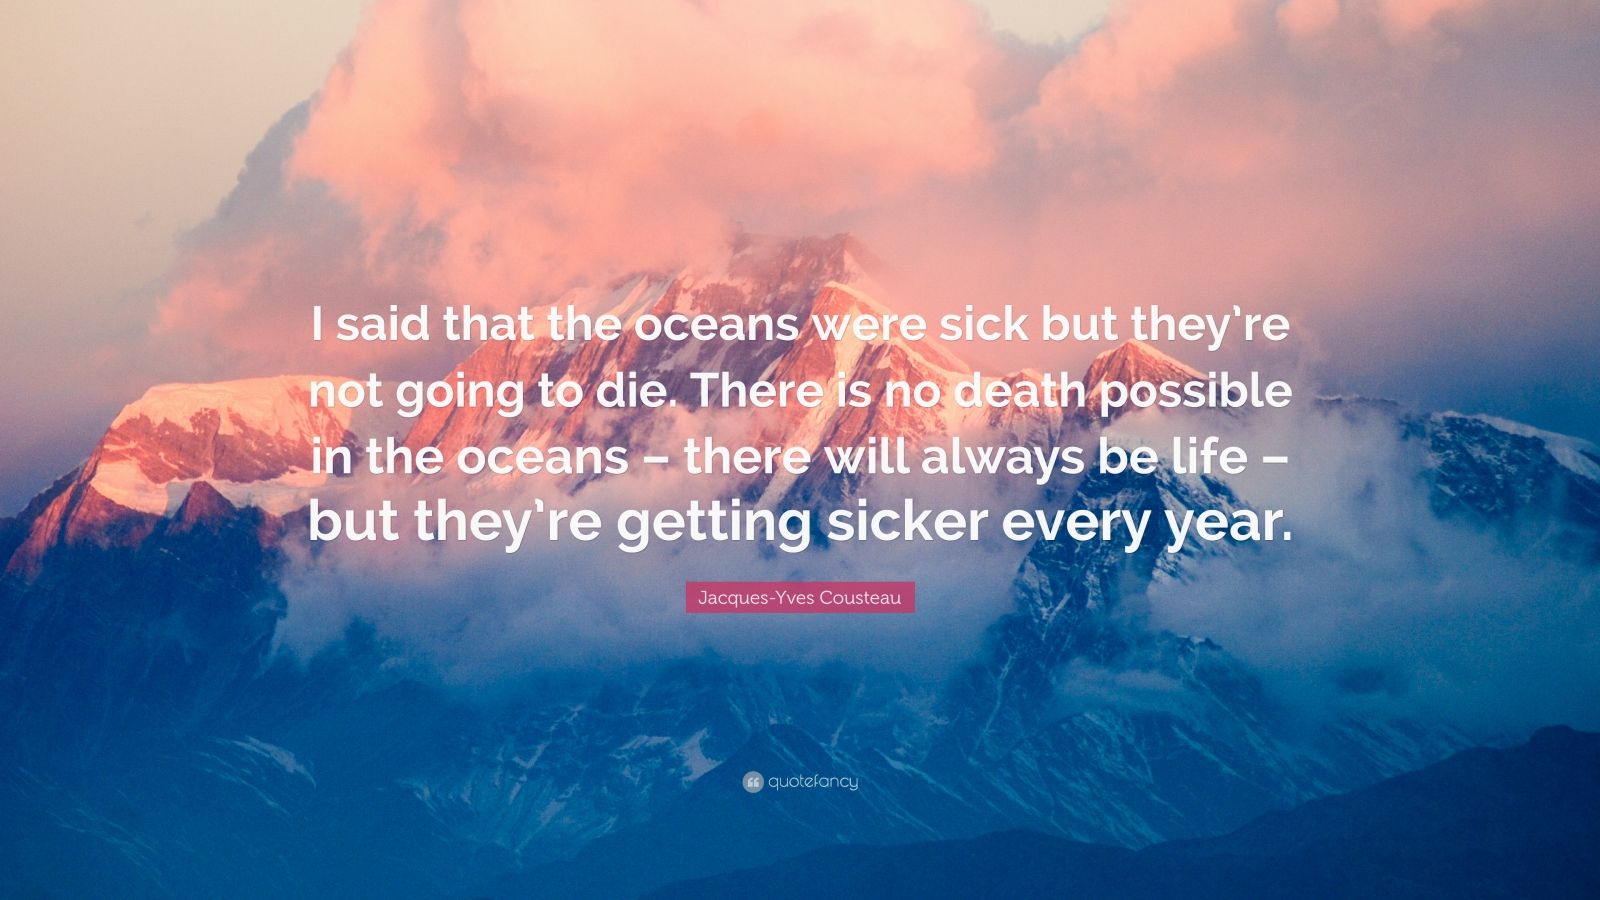 Jacques-Yves Cousteau Quote: “I said that the oceans were sick but they